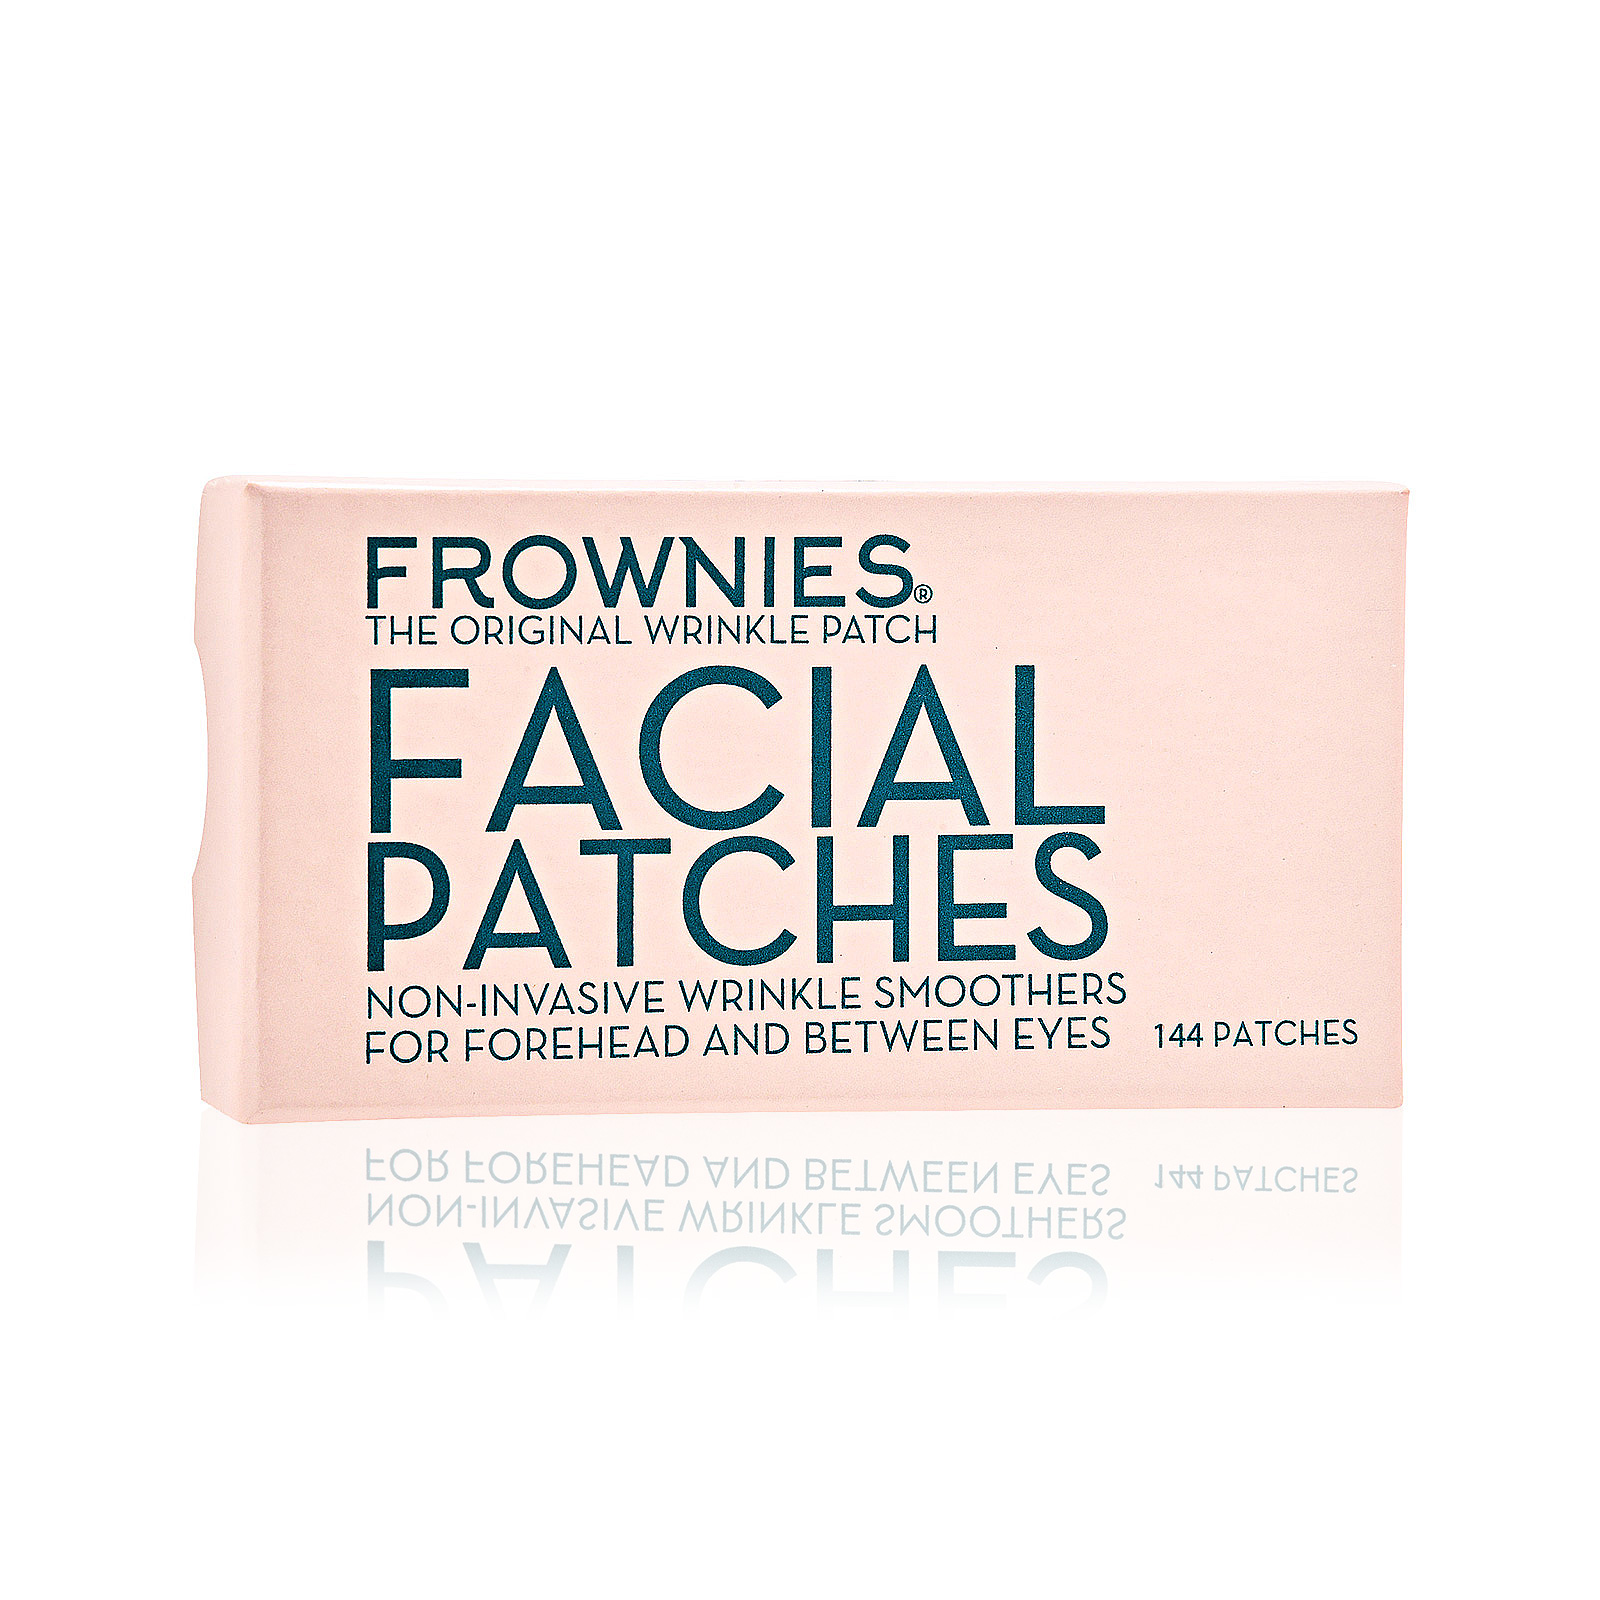 Facial Patches for Wrinkles on the Forehead & Between Eyes